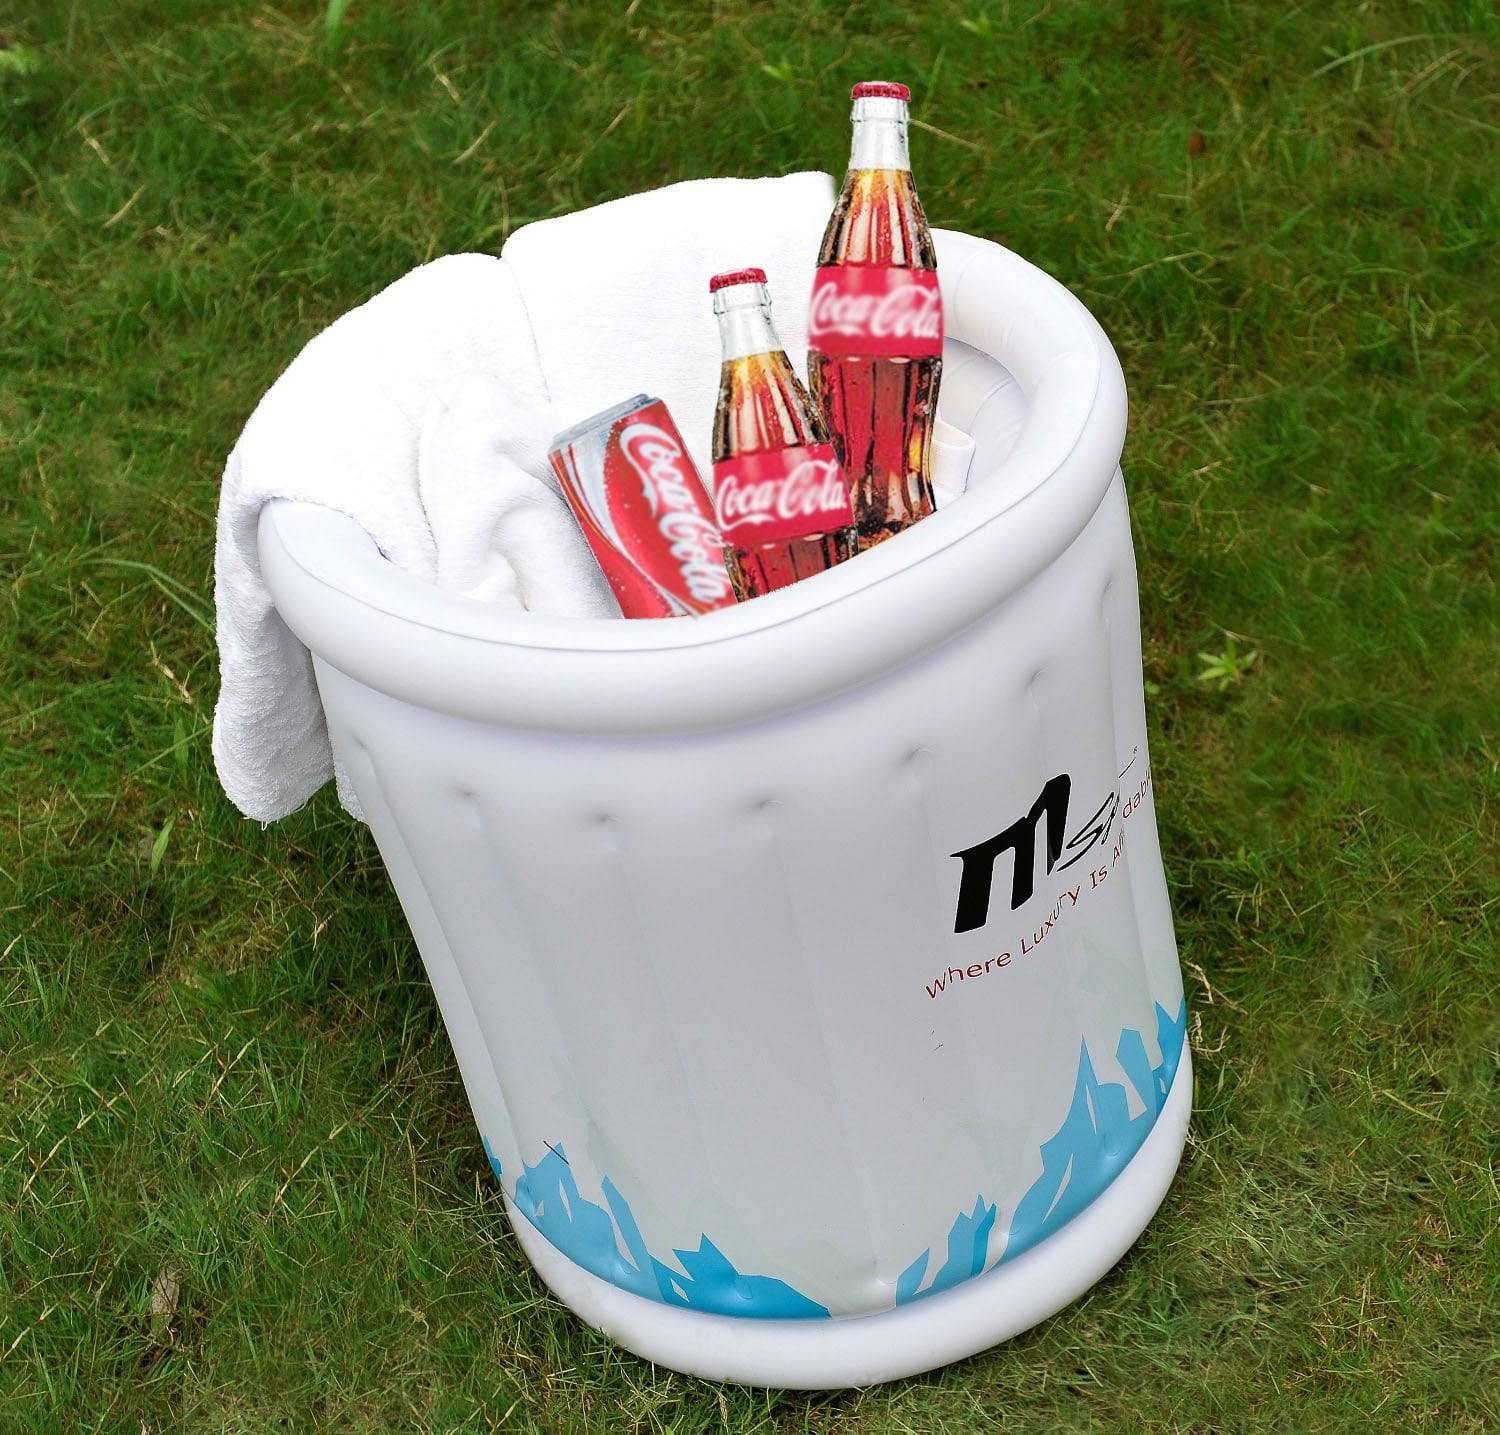 Inflatable Cooler - DTI Direct USA